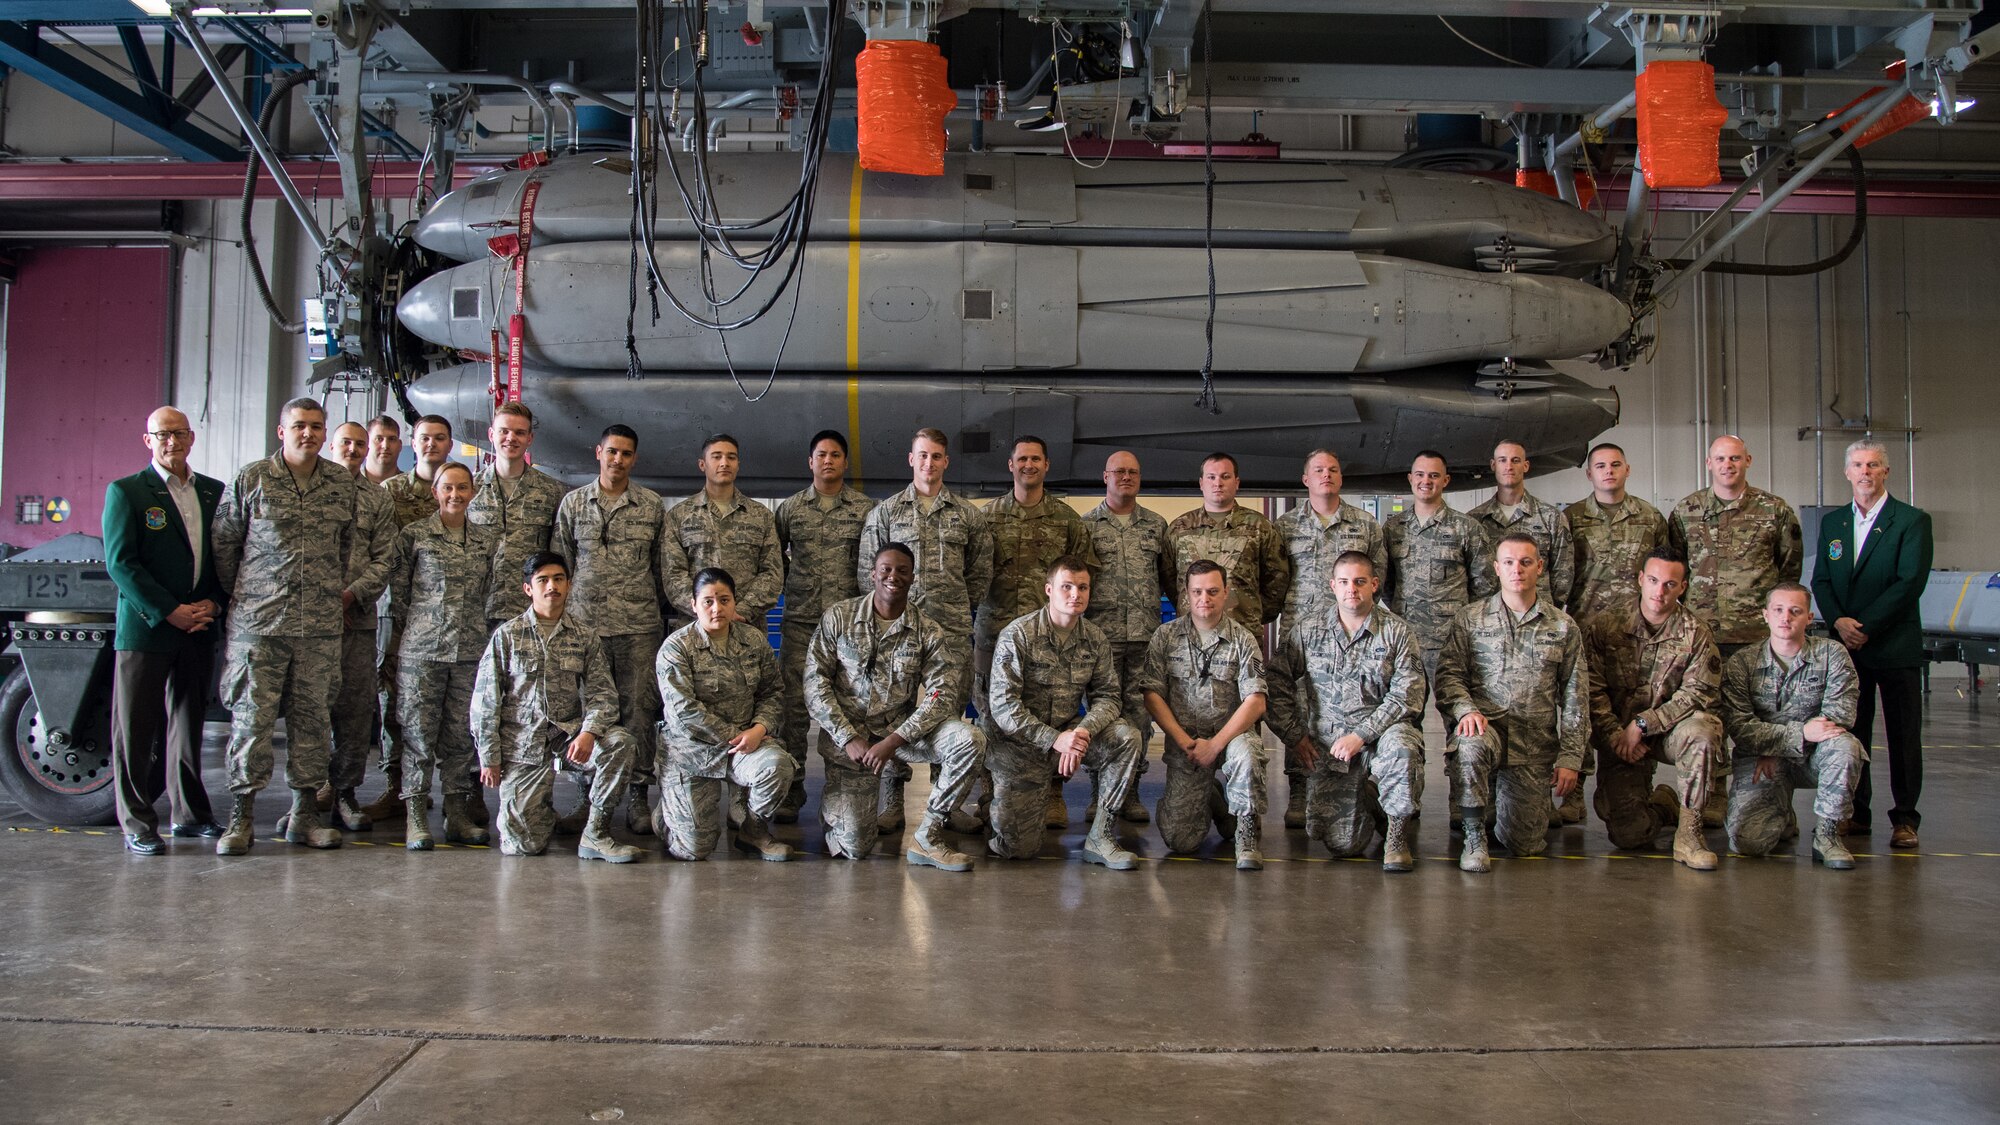 Airmen from the 2nd Munitions Squadron alongside retired Cols. Warren Ward (far left) and Trey Morriss (far right), members of Operation Secret Squirrel, pose in front of the final Conventional Air-Launched Cruise Missile (CALCM) package at Barksdale Air Force Base, La., Nov. 20, 2019. The CALCM missile package is being retired and replaced by more advanced Long-Range Stand-Off (LRSO) weapons. (U.S. Air Force photo by Airman 1st Class Jacob B. Wrightsman)